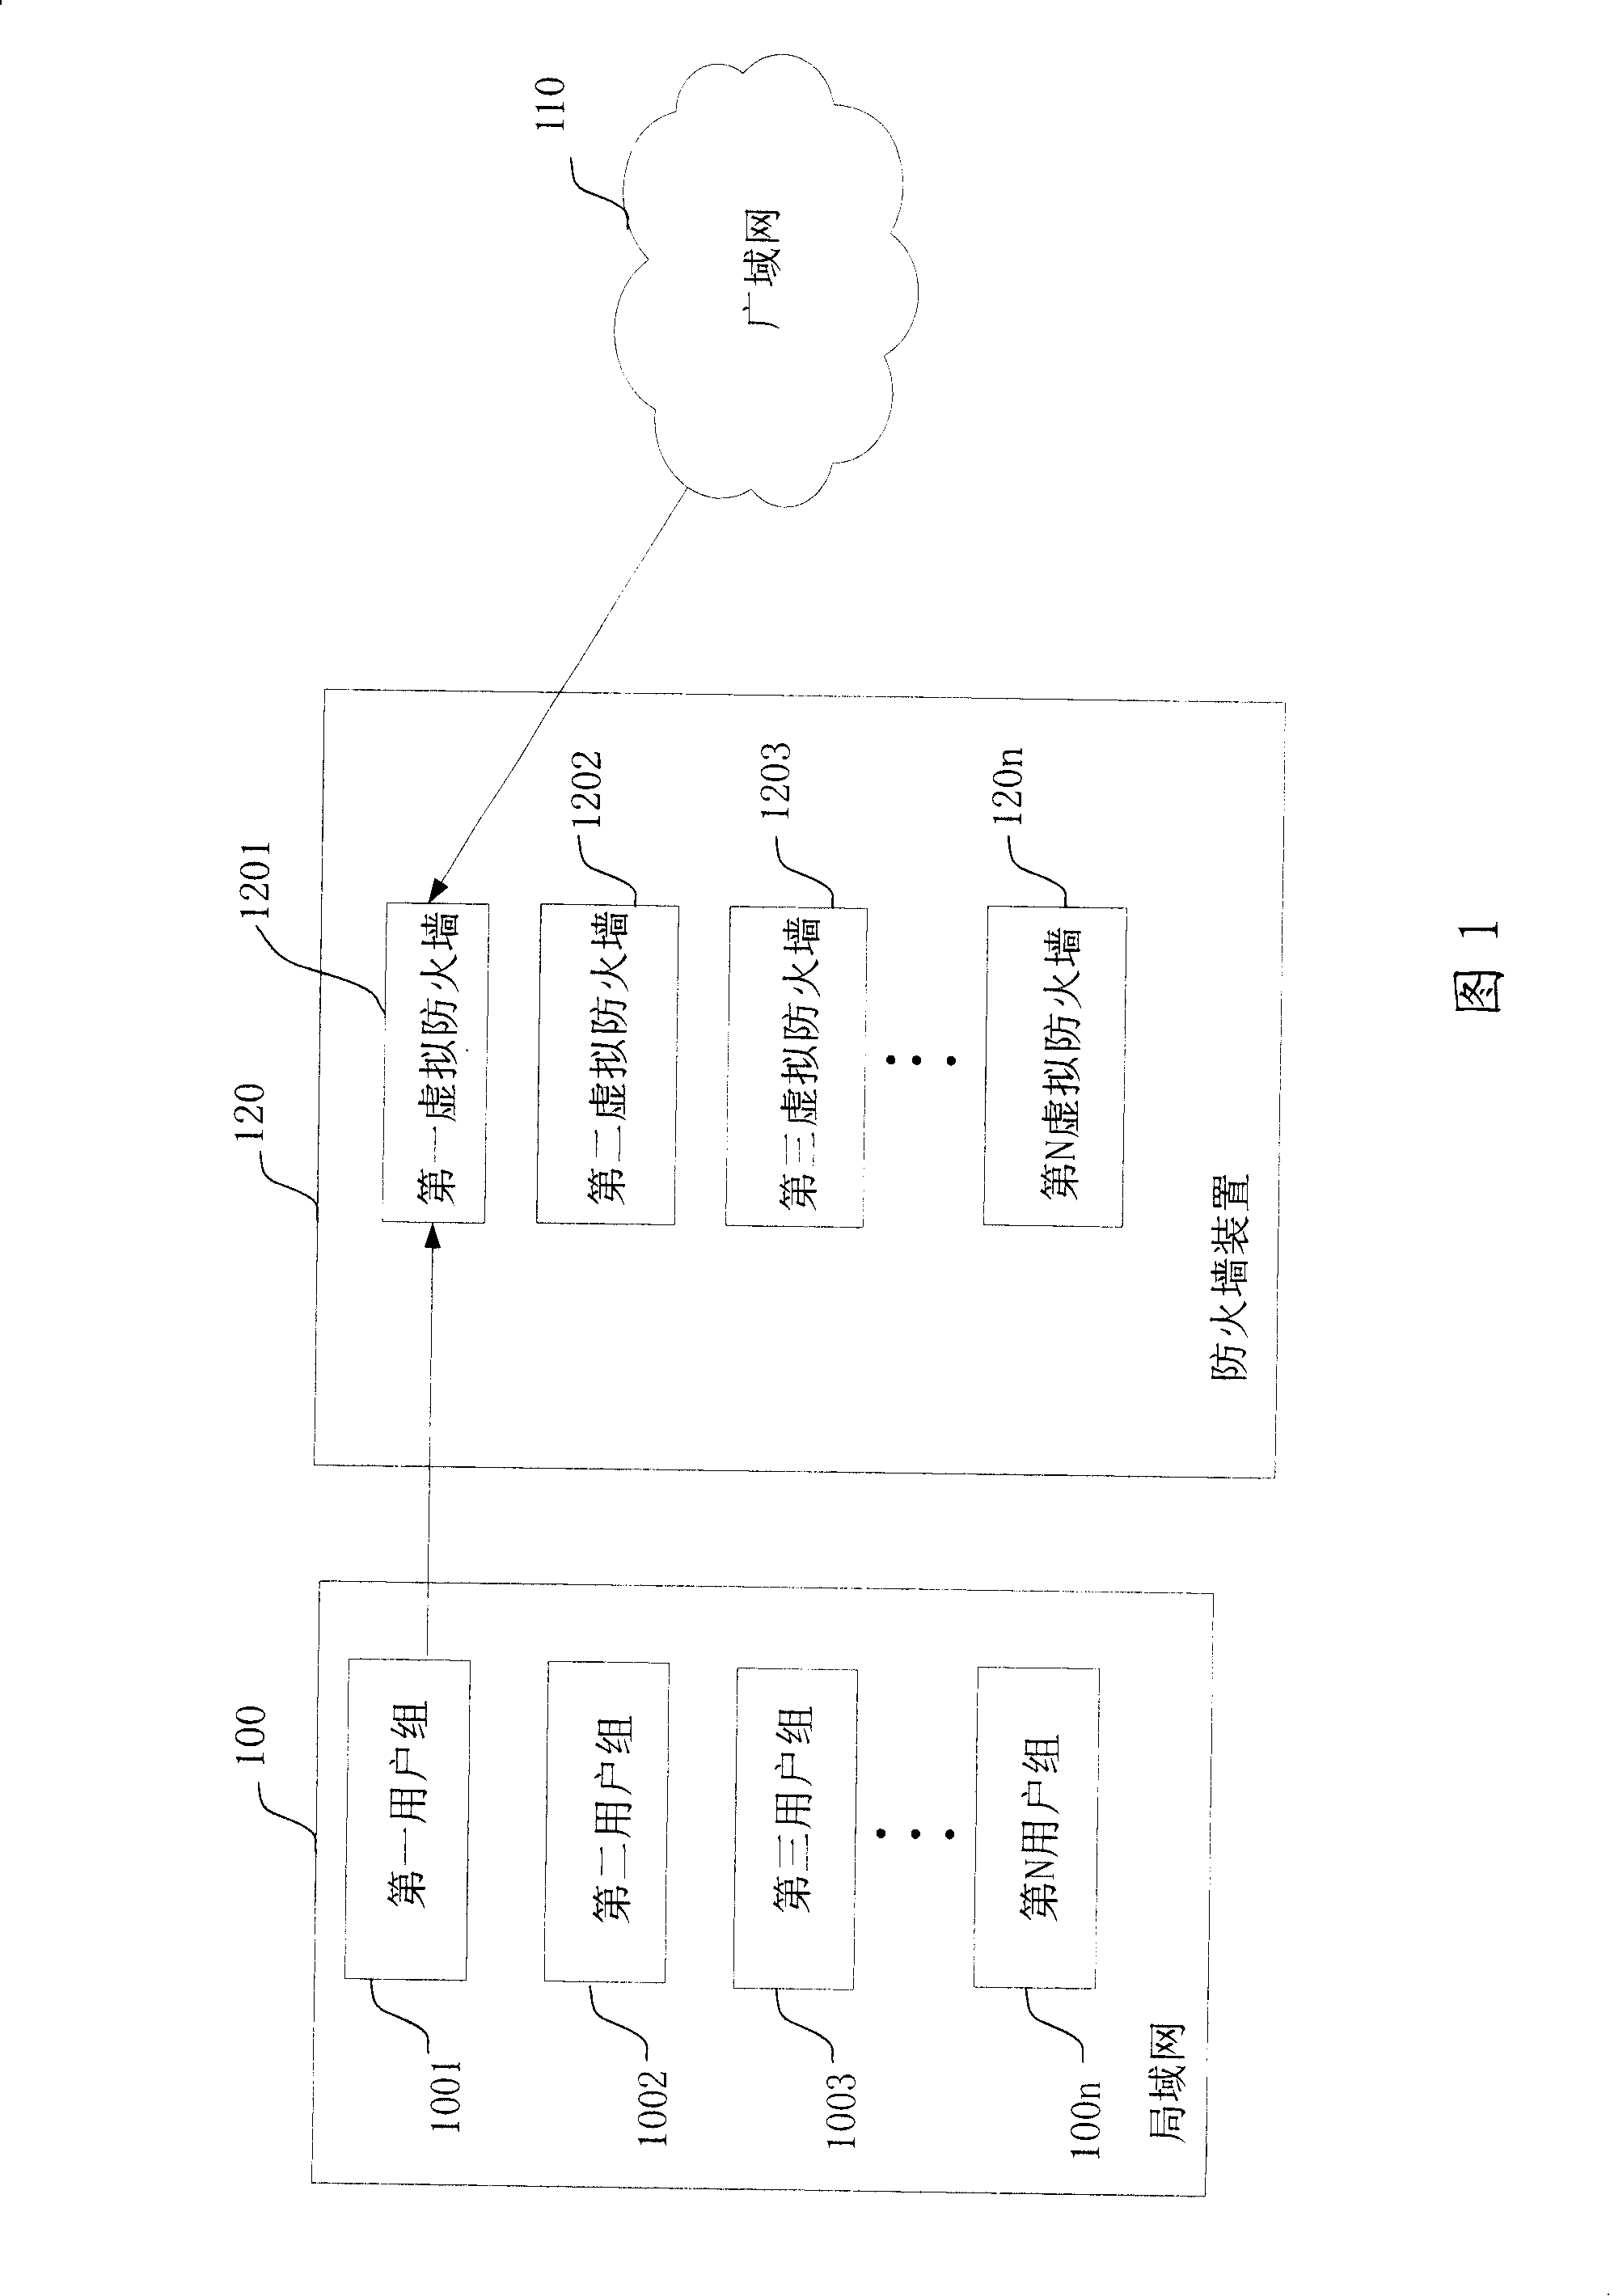 Network access control method and firewall device